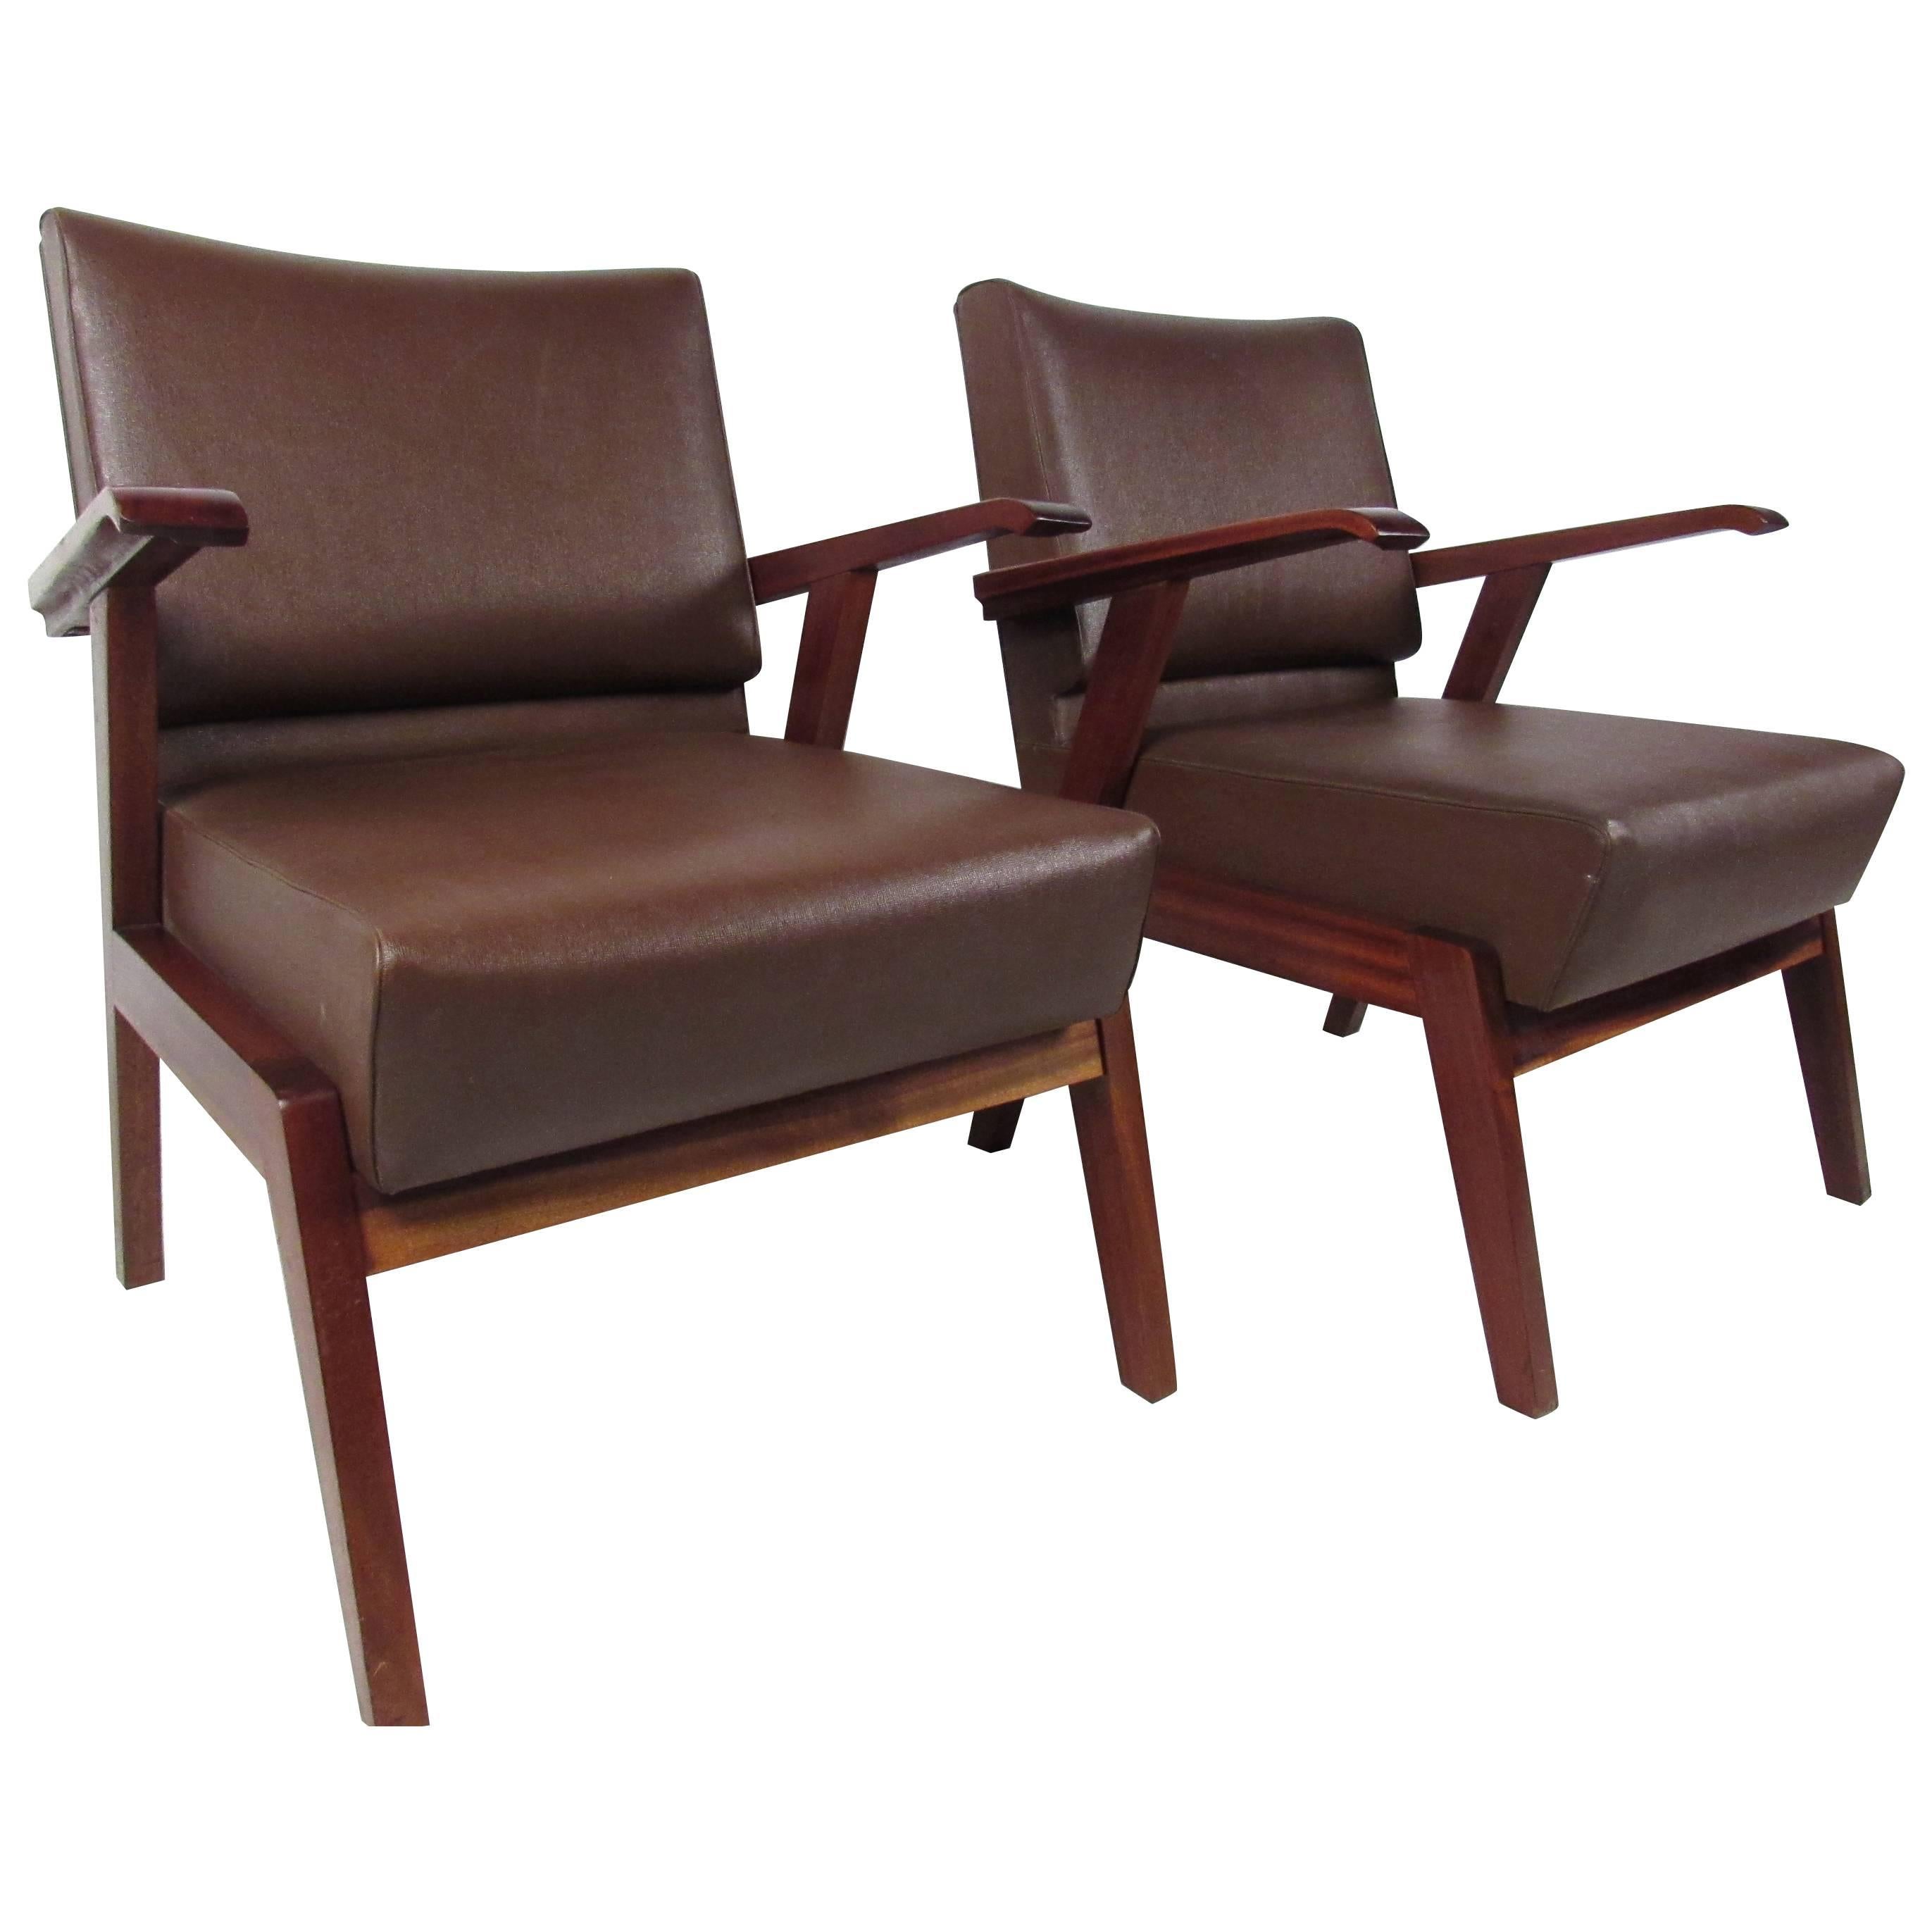 Pair of Unique Mid-Century Modern Italian Floating Armchairs